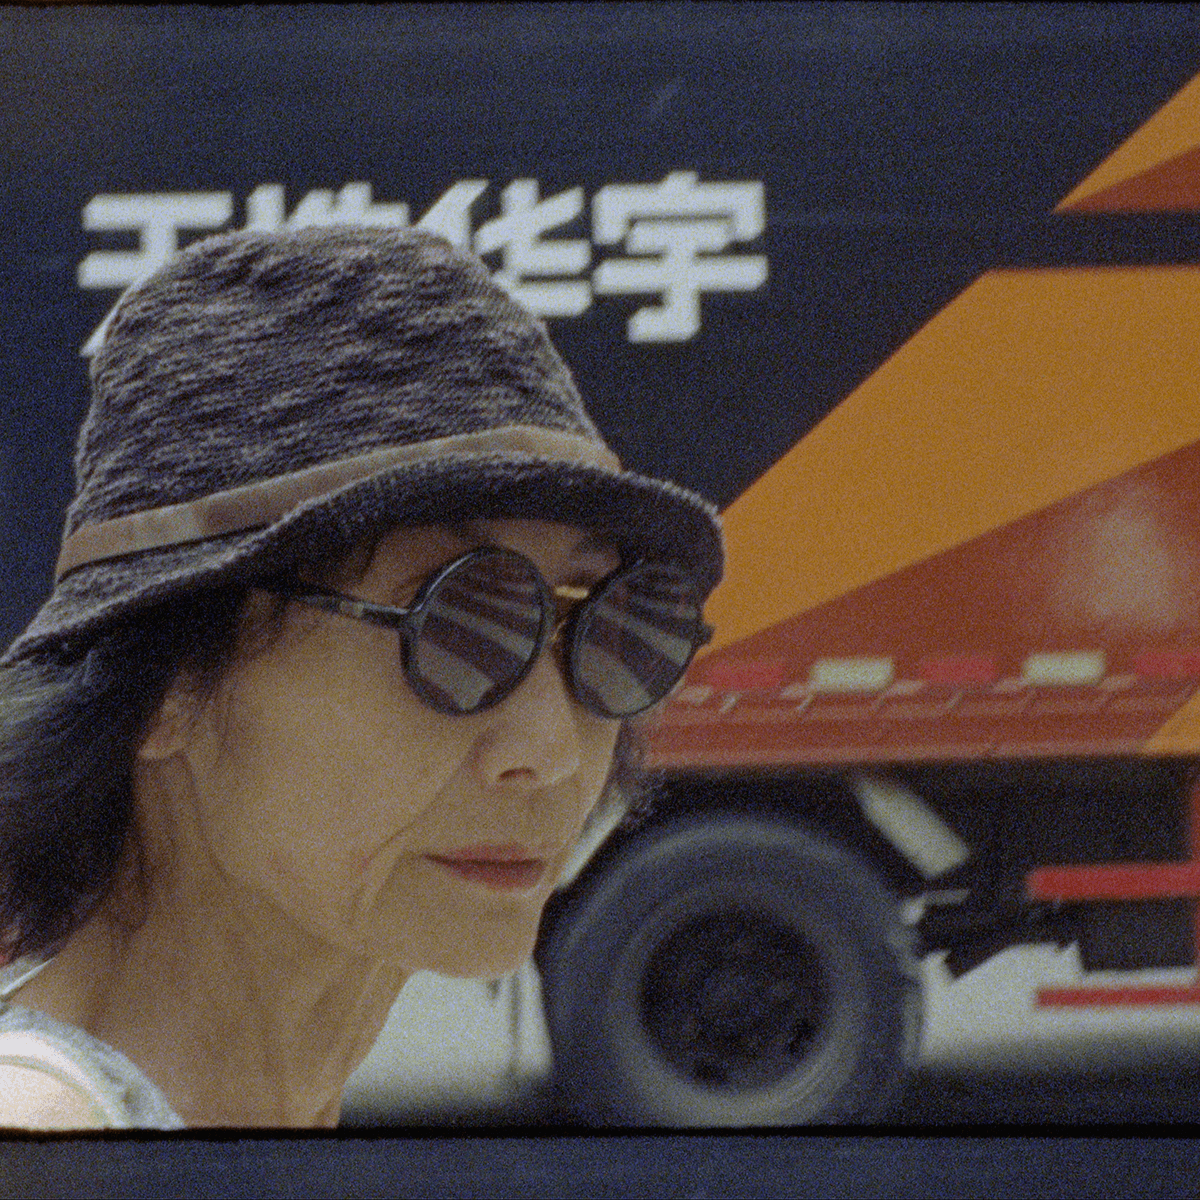 a person with glasses and a hat stands in front of a truck